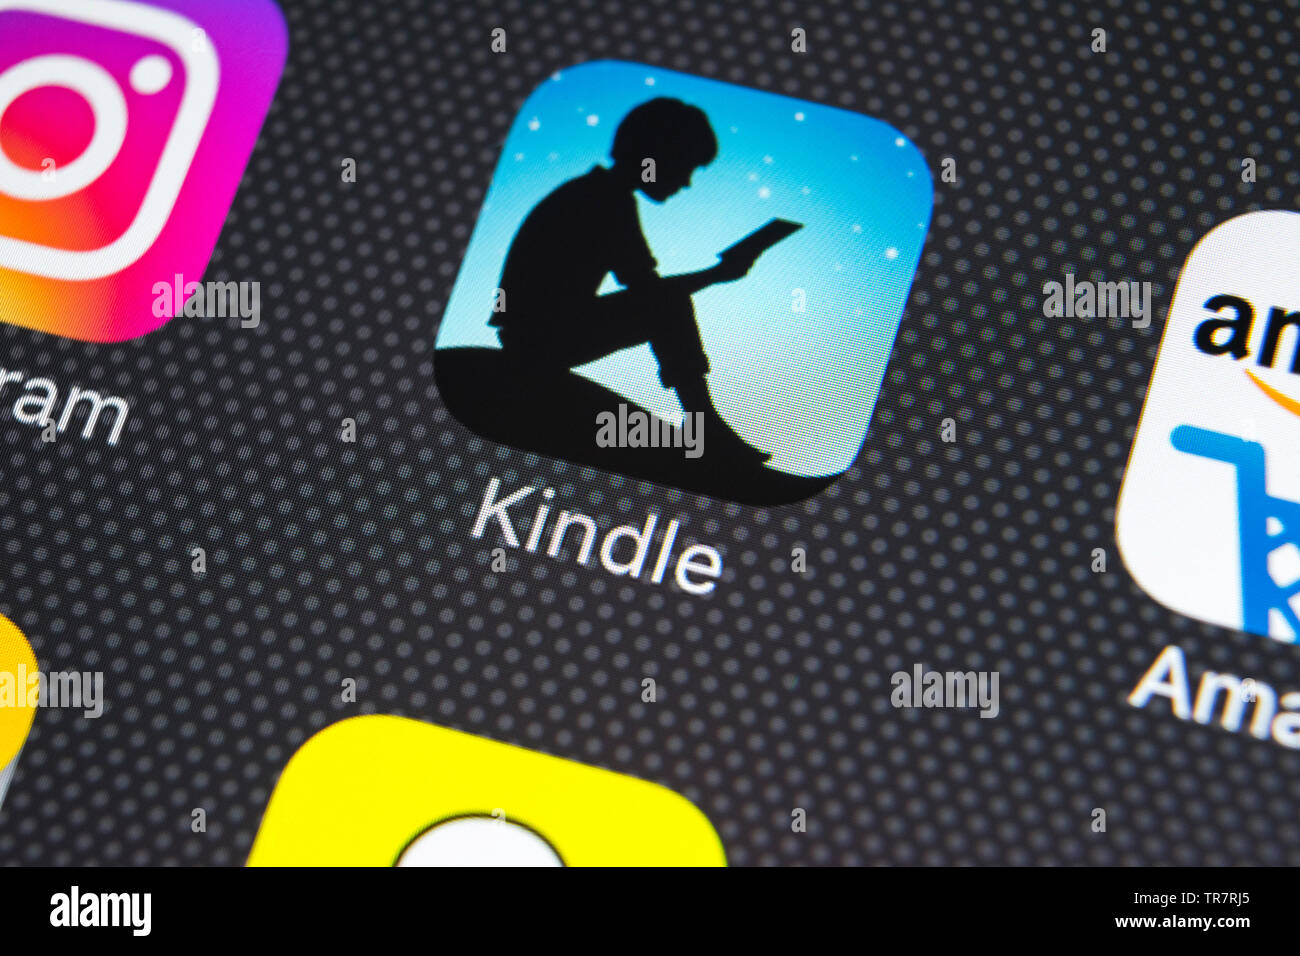 Sankt-Petersburg, Russia, February 21, 2018: Amazon Kindle application icon on Apple iPhone X screen close-up. Amazon Kindle app icon. Amazon kindle a Stock Photo